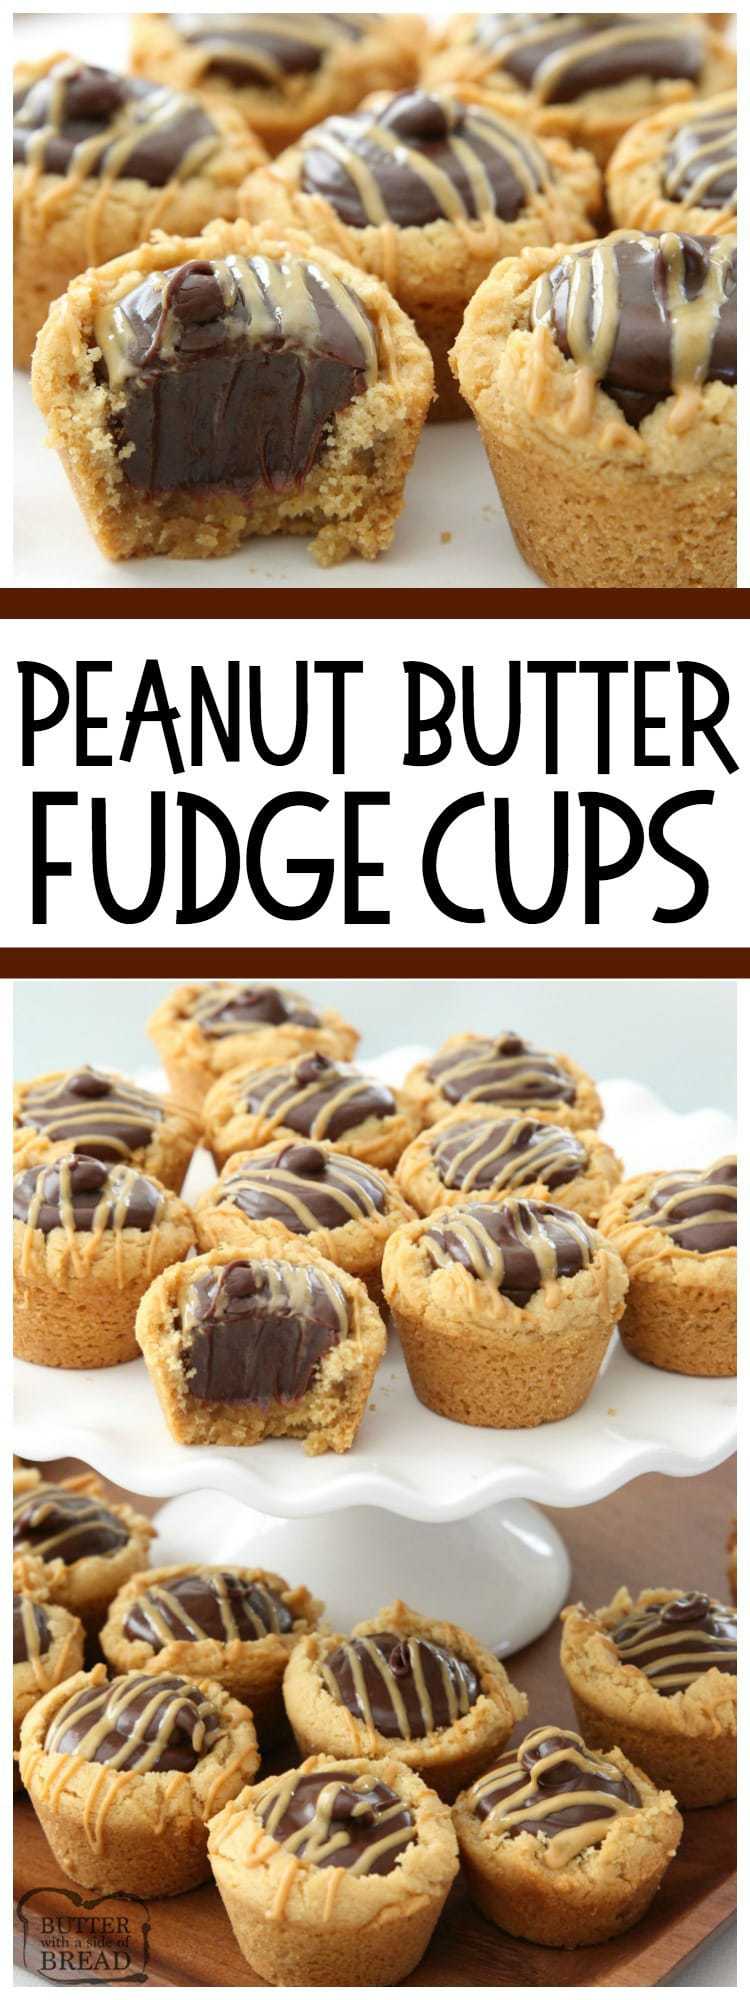 Peanut Butter Fudge Cups are peanut butter cookies filled with a simple chocolate fudge! Delicious flavor combination in these amazing treats from Butter With A side of Bread #peanutbutter #chocolate #fudge #cookies #recipe